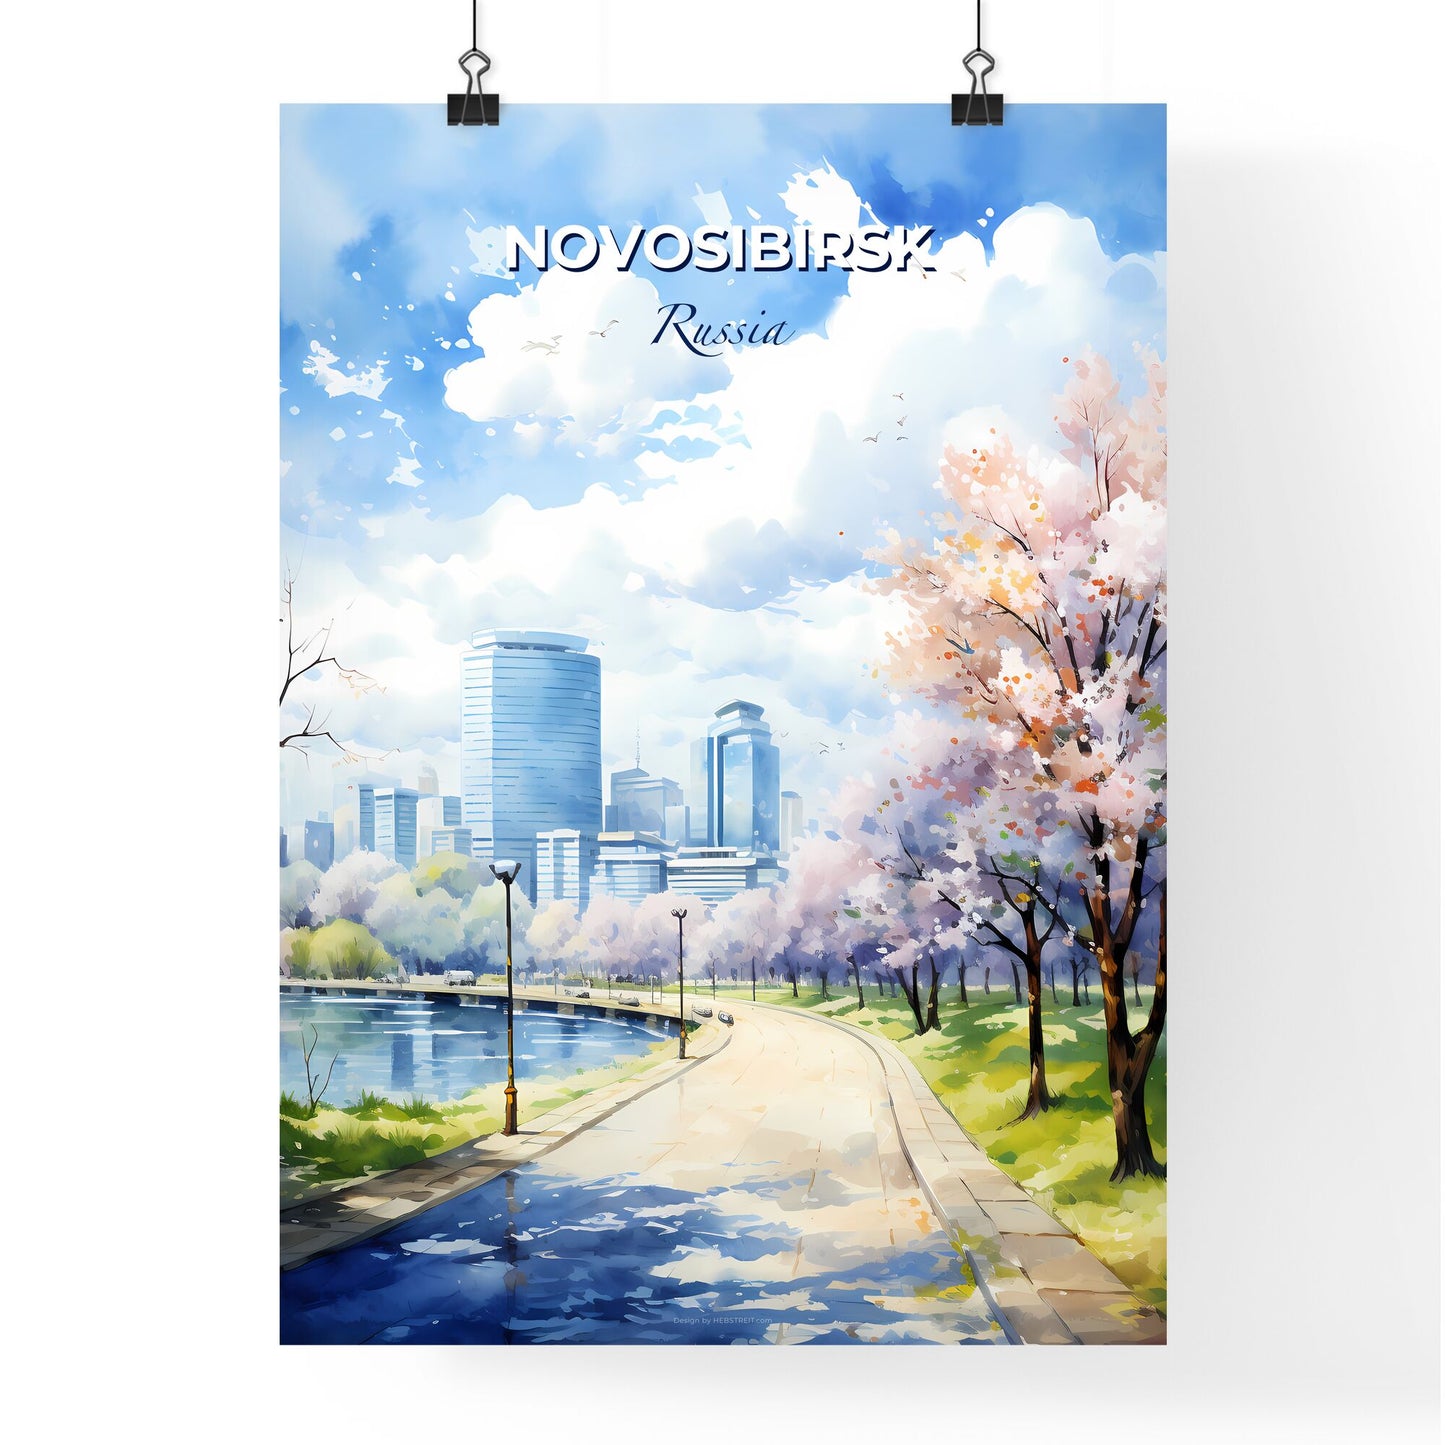 Novosibirsk Russia Skyline - A Water Way With Trees And A City In The Background - Customizable Travel Gift Default Title